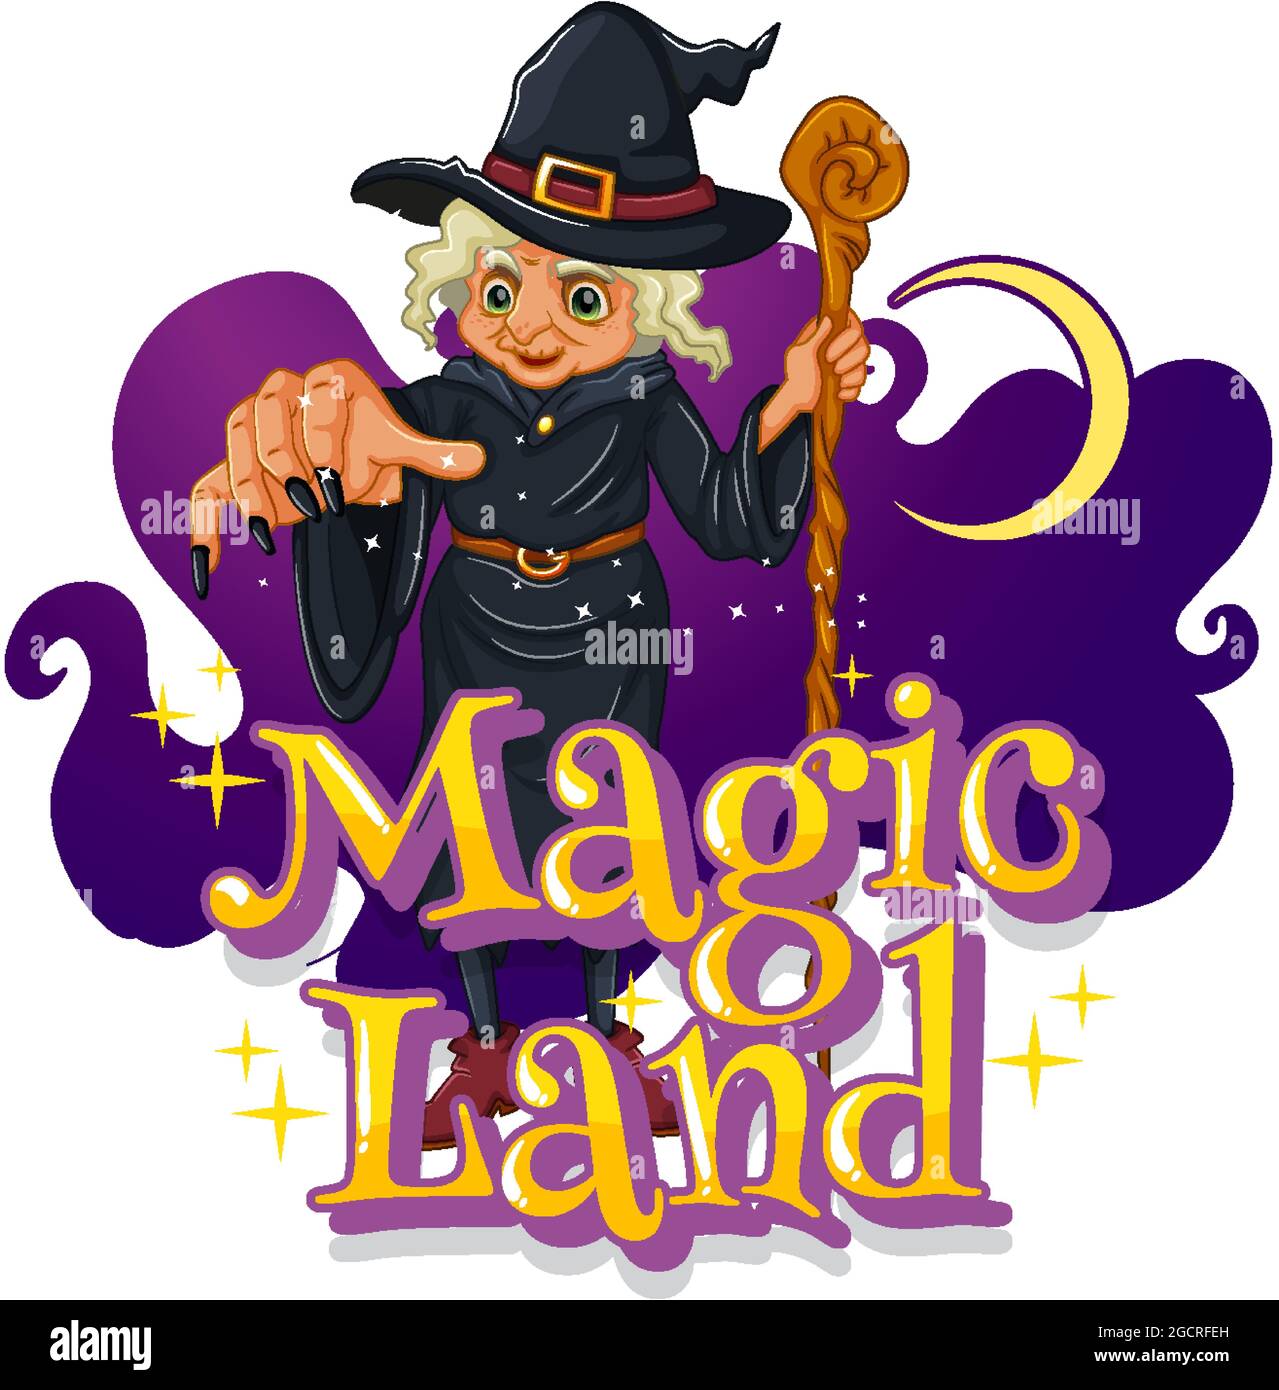 Magic Land font with a witch cartoon character illustration Stock Vector  Image & Art - Alamy